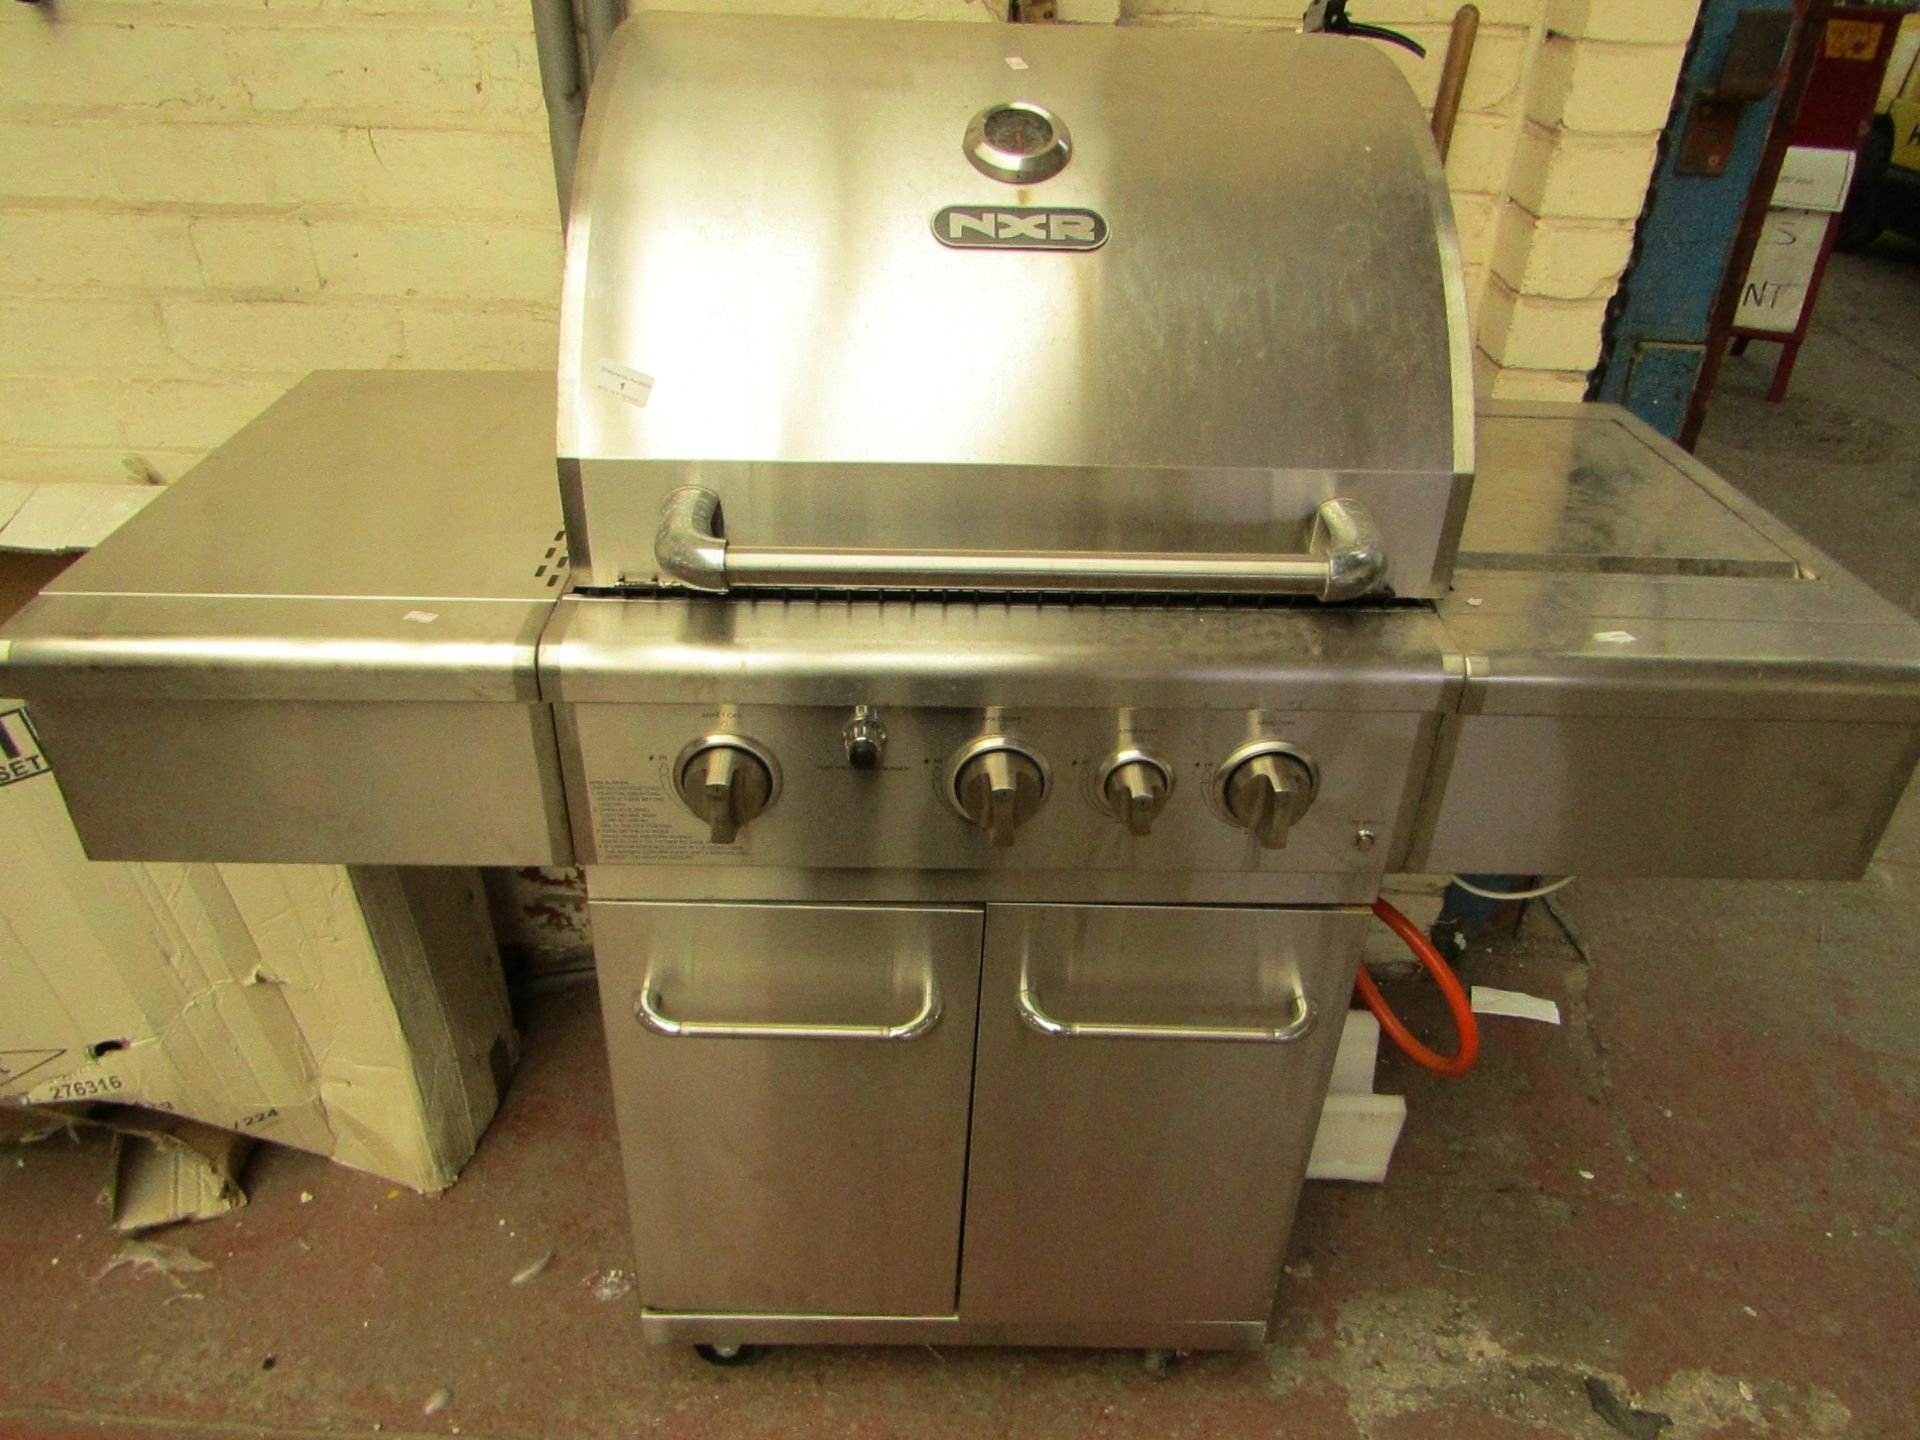 NXR - Gas BBQ - Unused Condition, Needs a Valet - Untested.